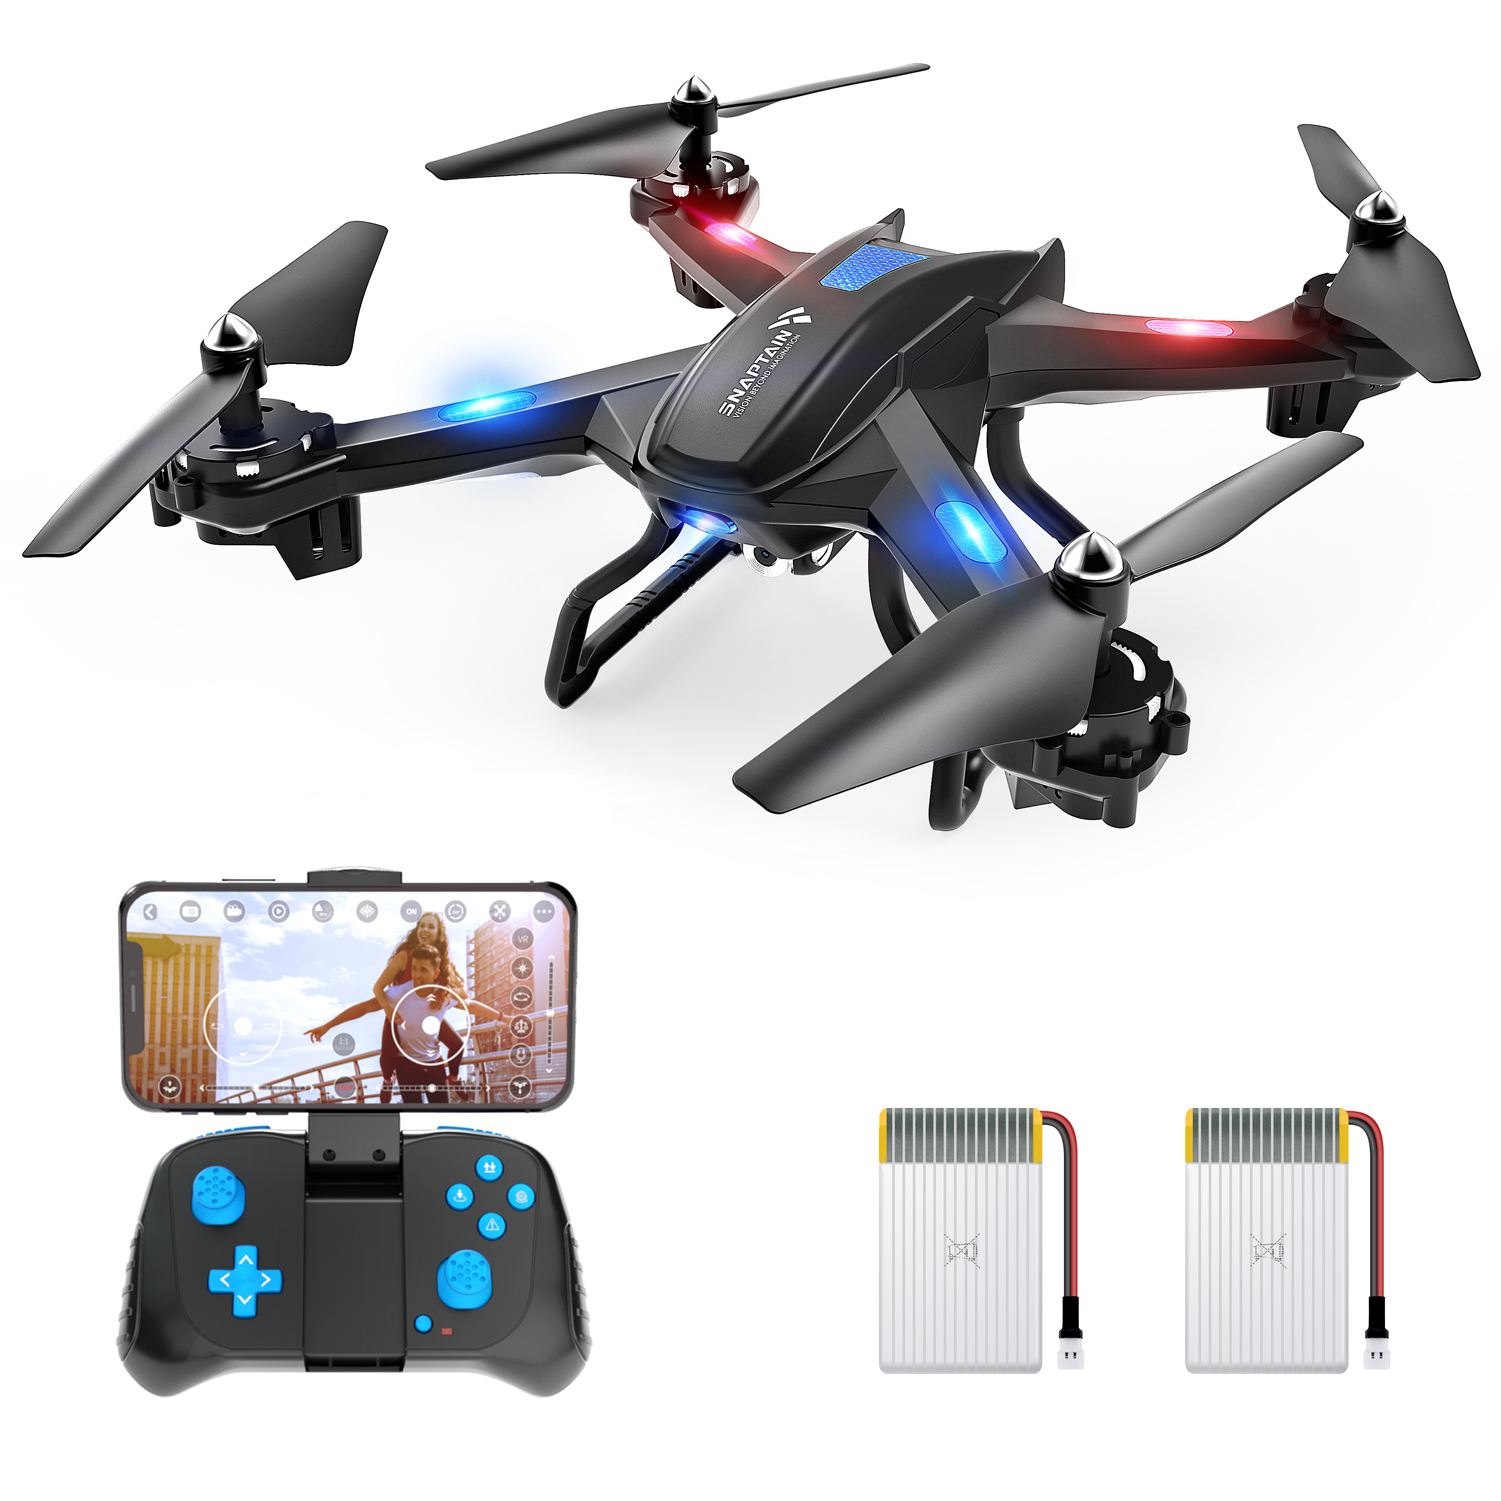 SNAPTAIN S5C WiFi FPV Drone with 1080P FHD Camera, Voice Control, Gesture Control RC Quadcopter for Beginners with Altitude Hold, Gravity Sensor, RTF One Key Take Off/Landing, Compatible w/VR Headset - image 1 of 9